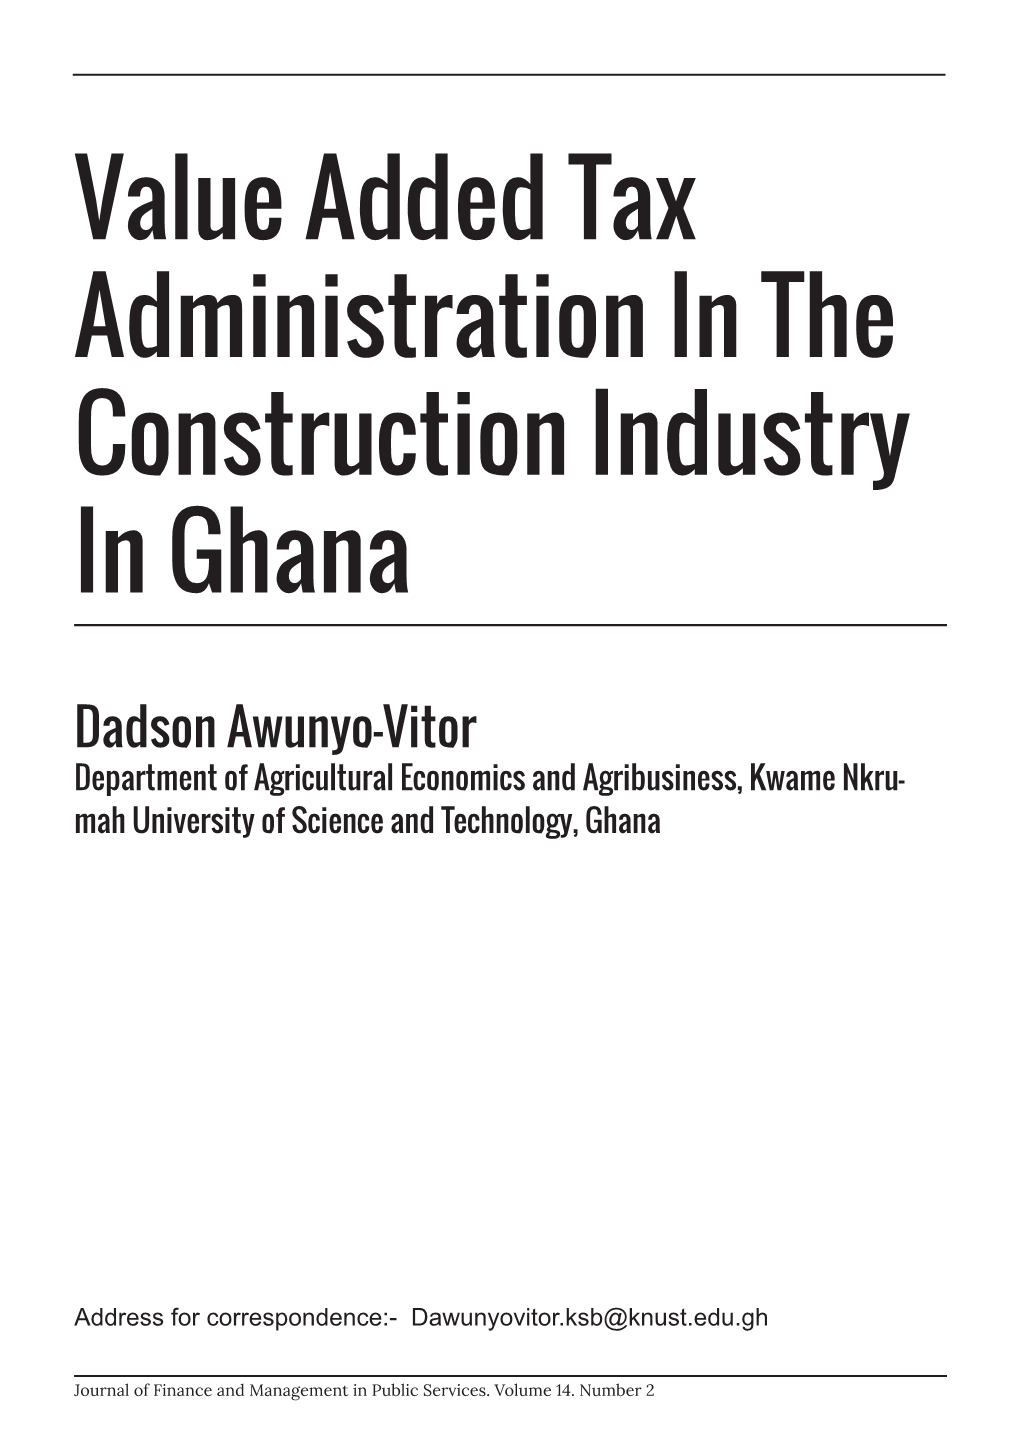 Value Added Tax Administration in the Construction Industry in Ghana